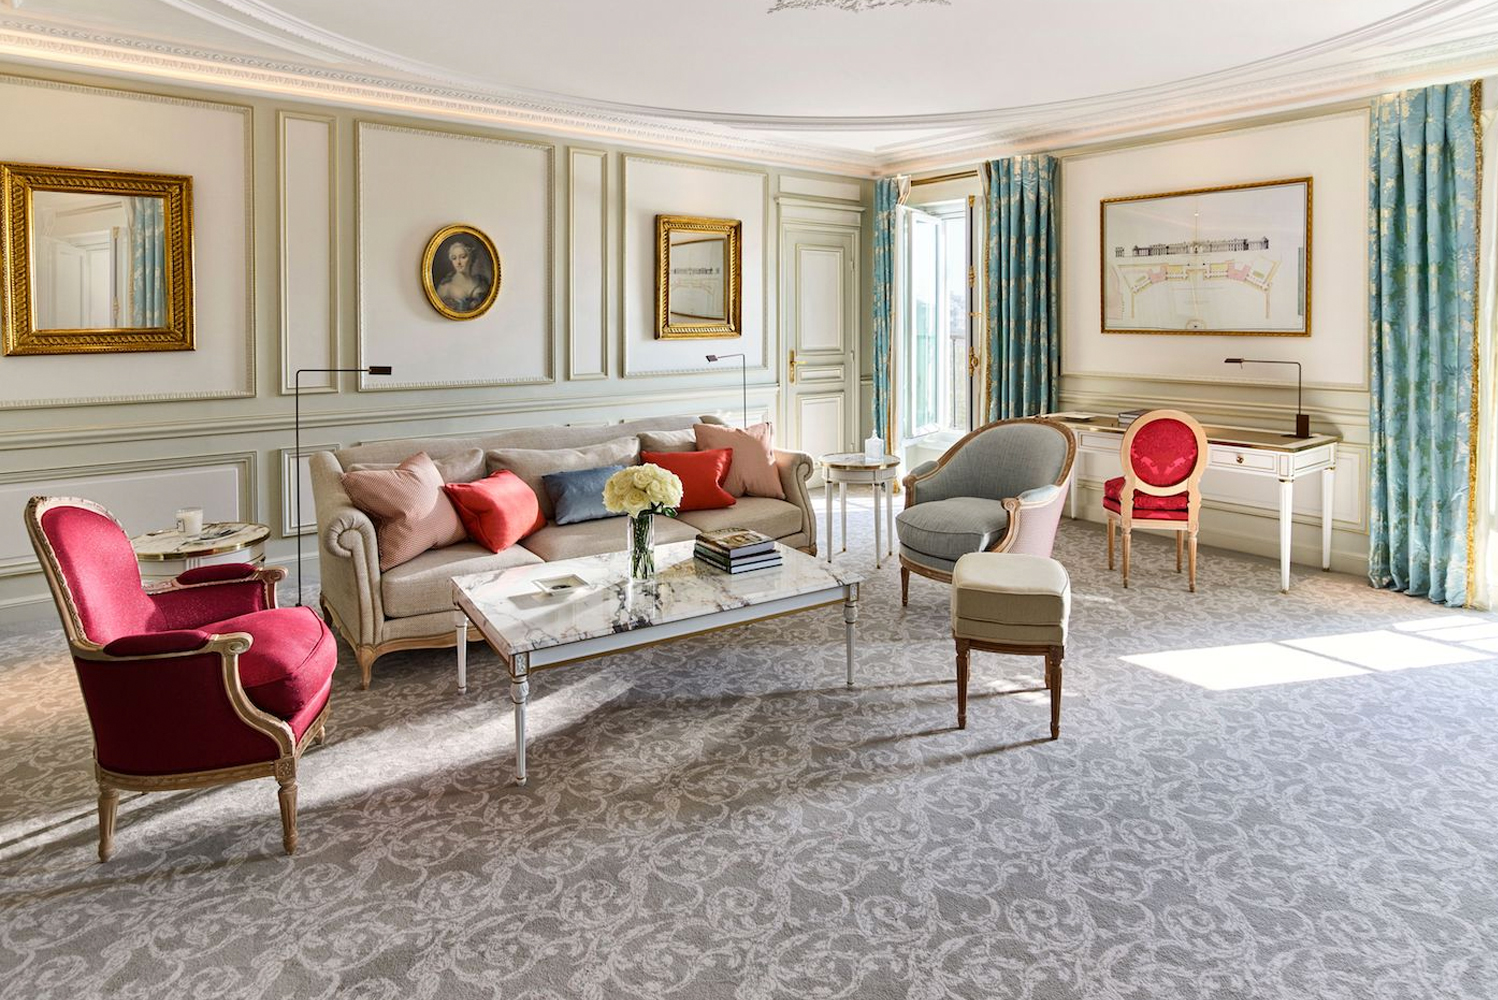 Dorchester Collections Le Meurice hotel completed the renovation of 29 rooms and suites from the third to sixth floor as 